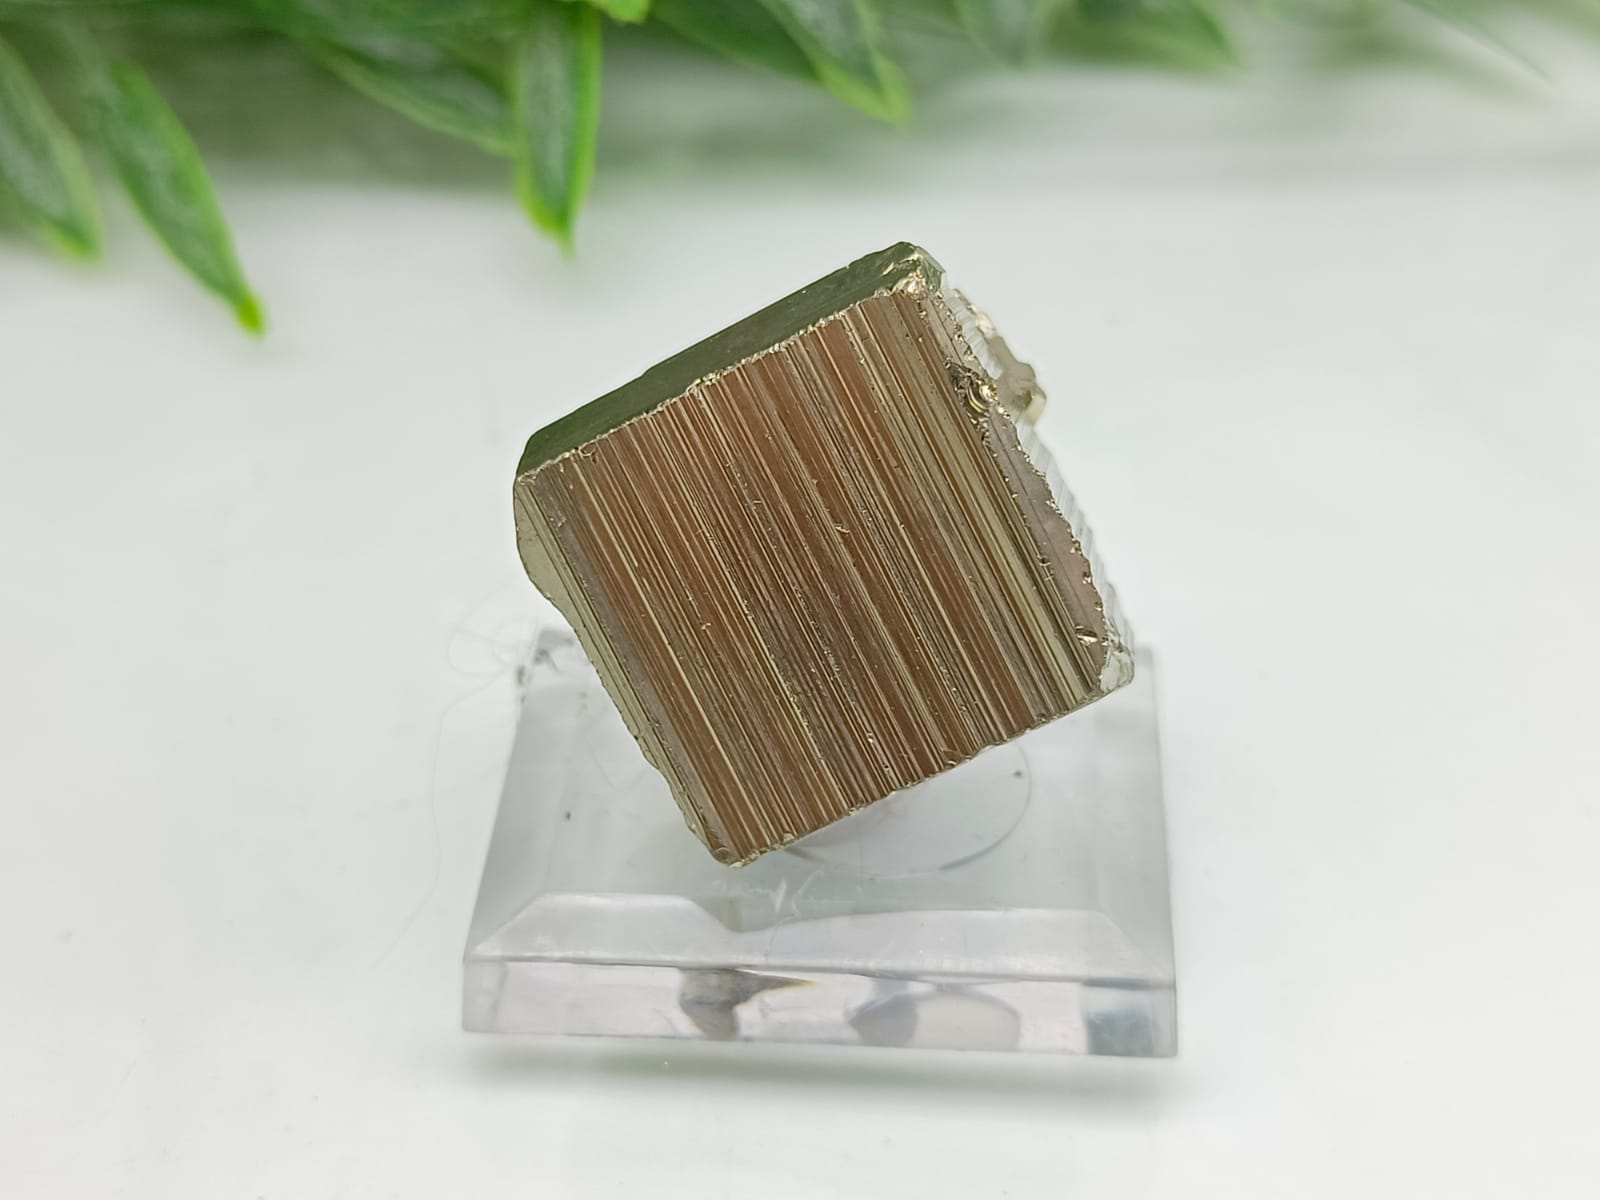 Natural Pyrite Cube Crystal Wellness